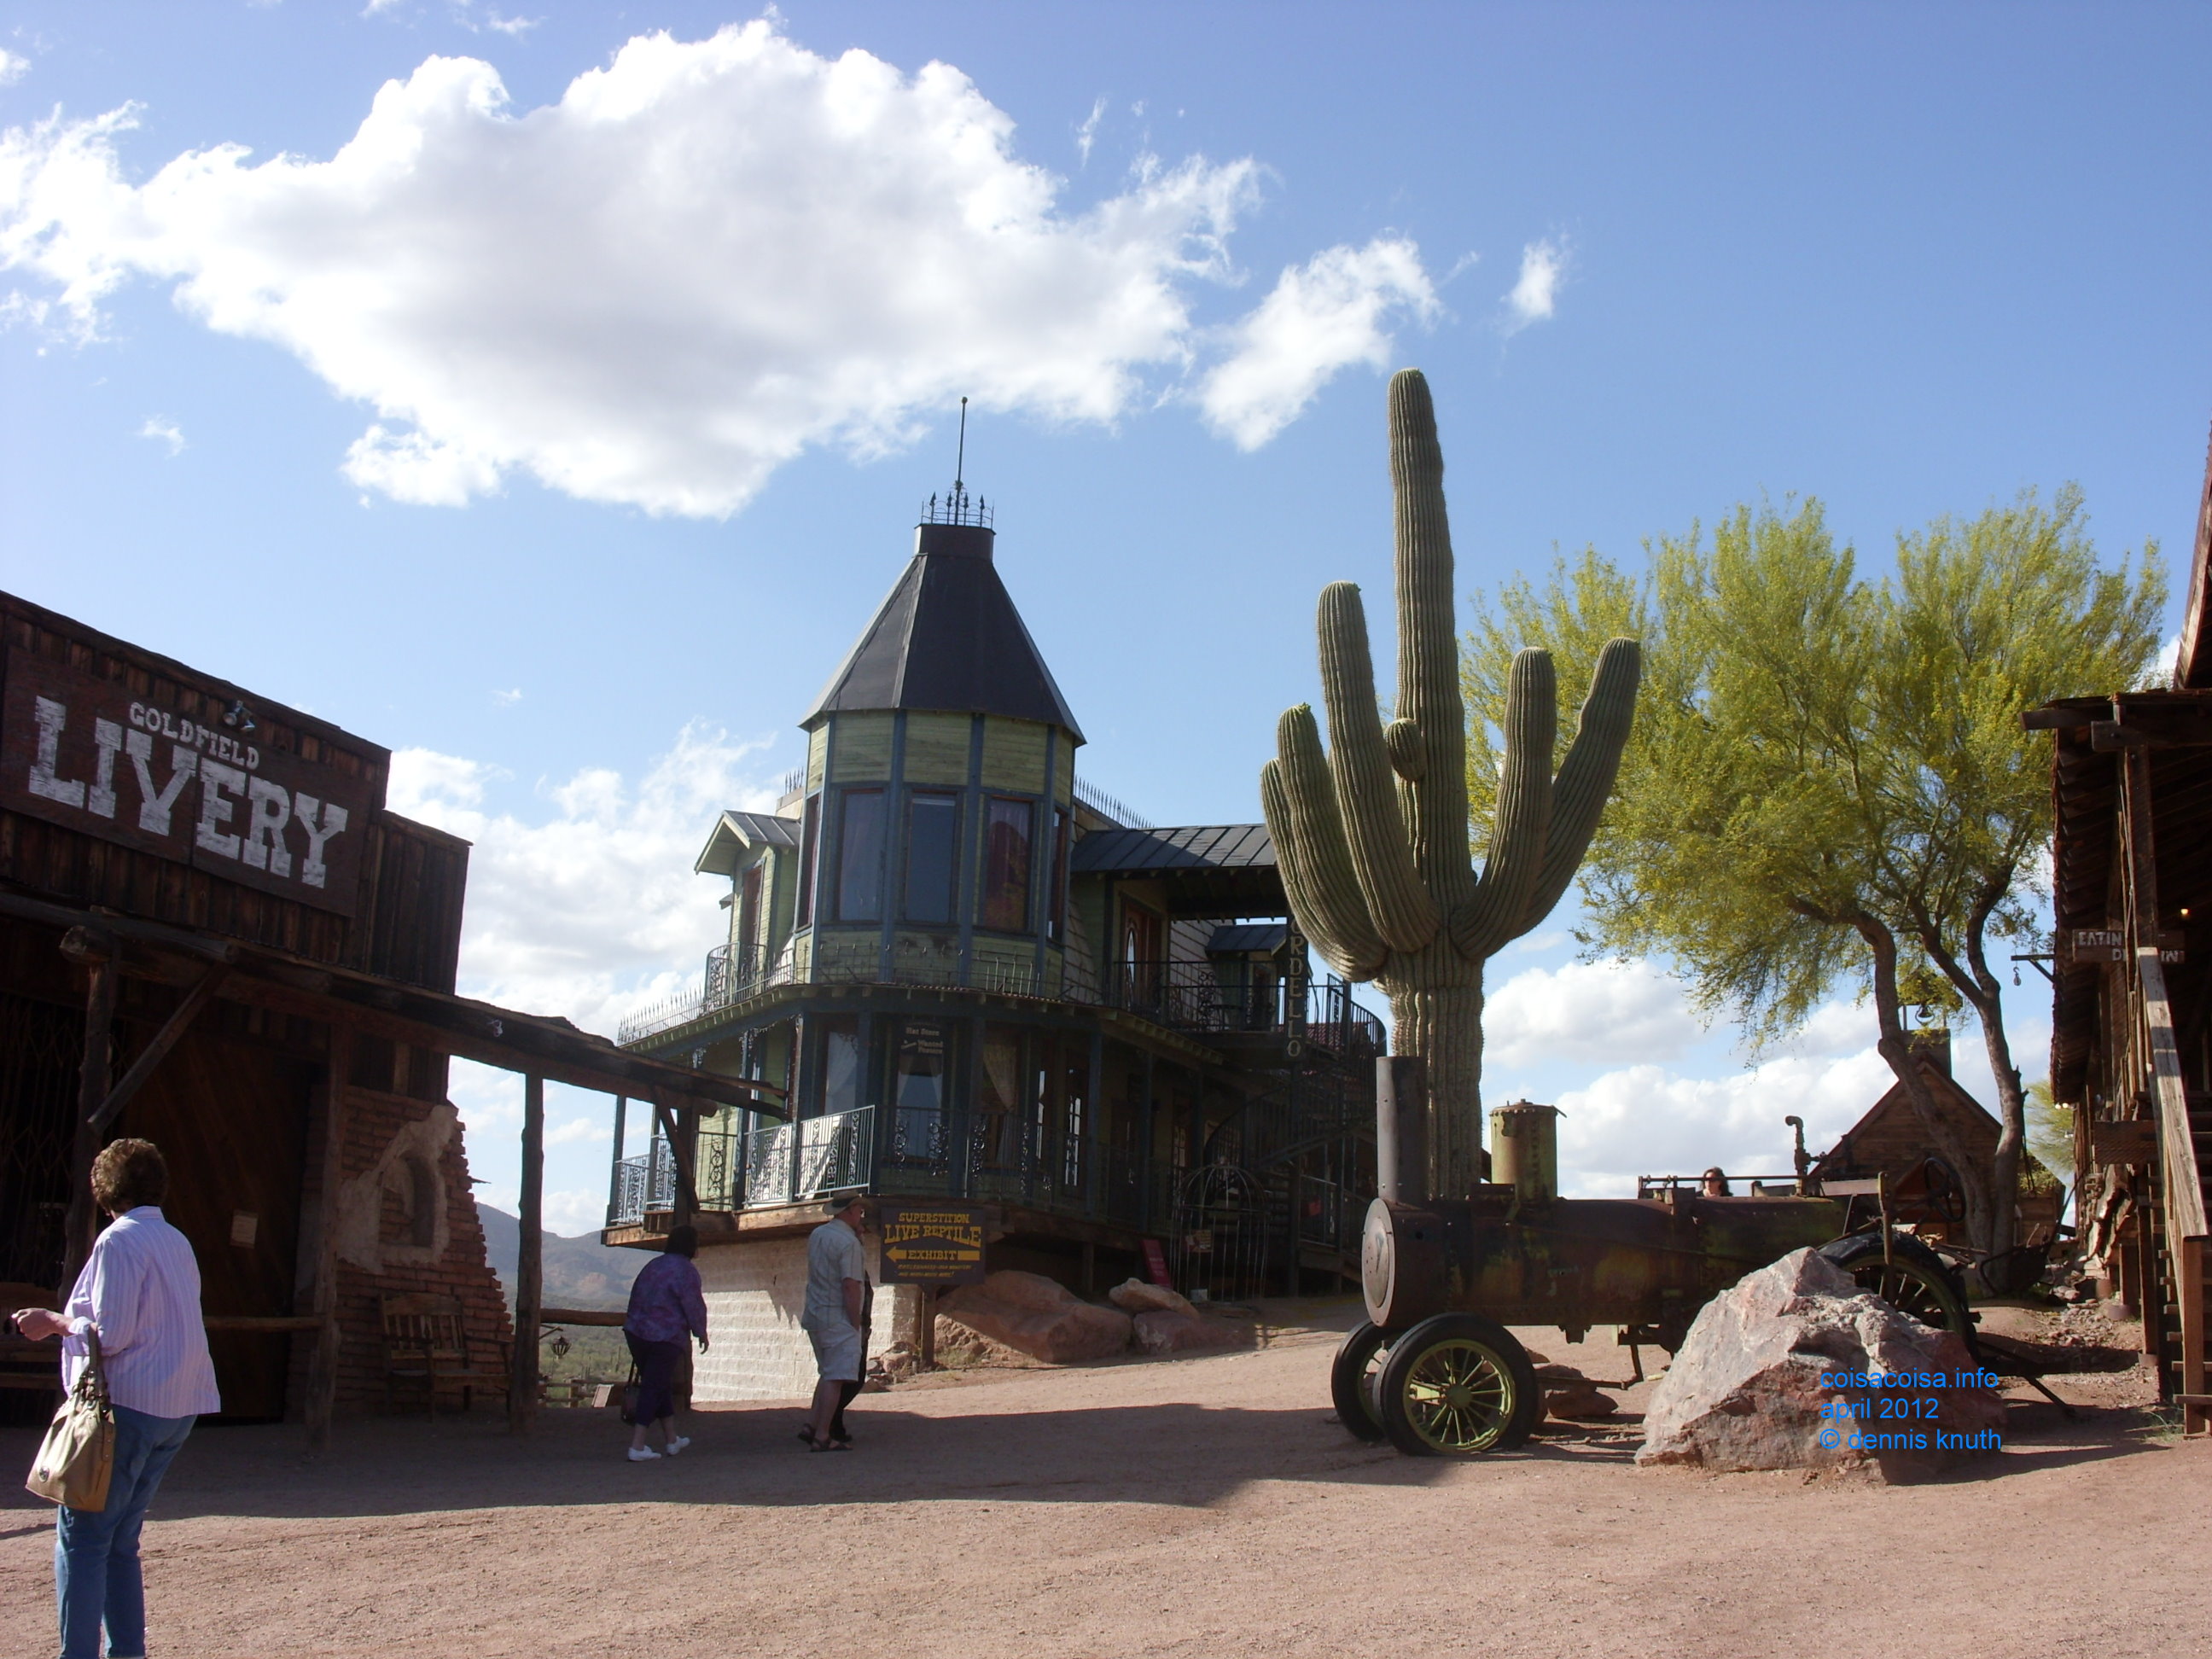 2012_04_26_e_apache_junction_ghost_town_0029.jpg (large)